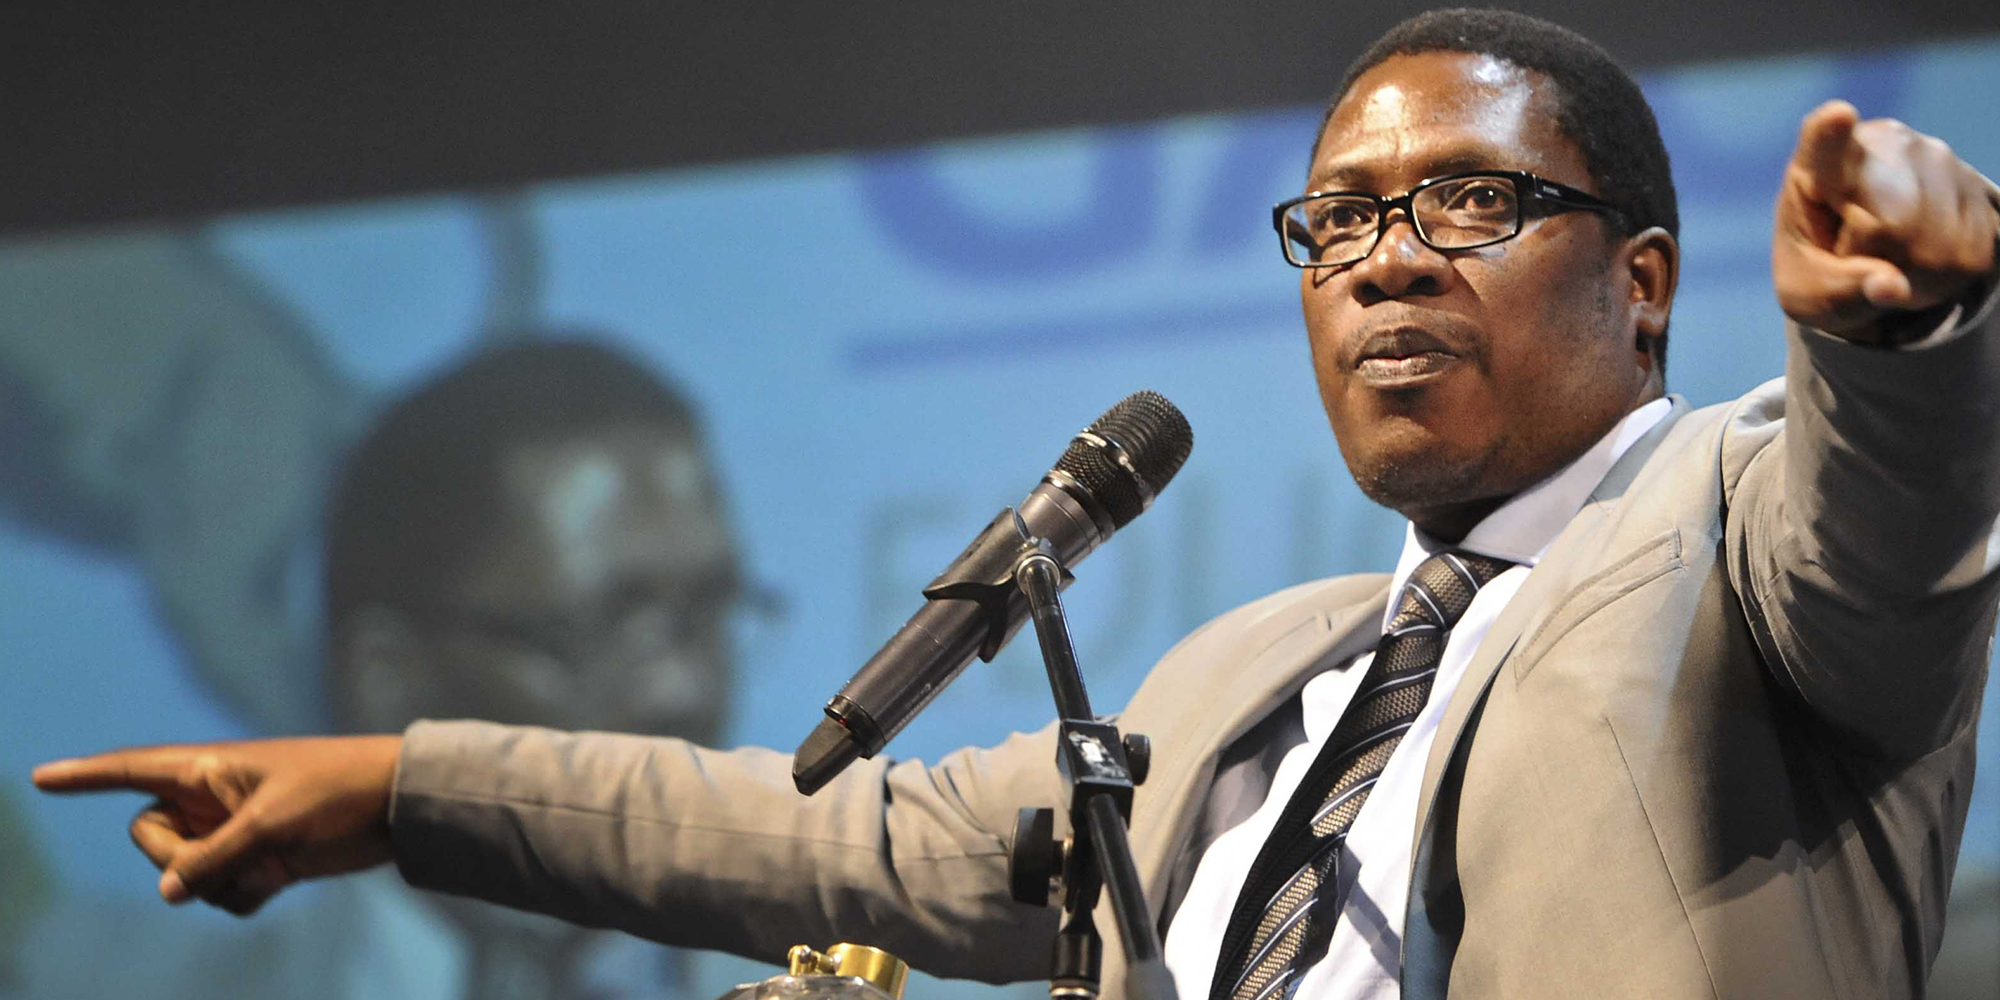 New Premier Panyaza Lesufi announces new and ambitious plans to